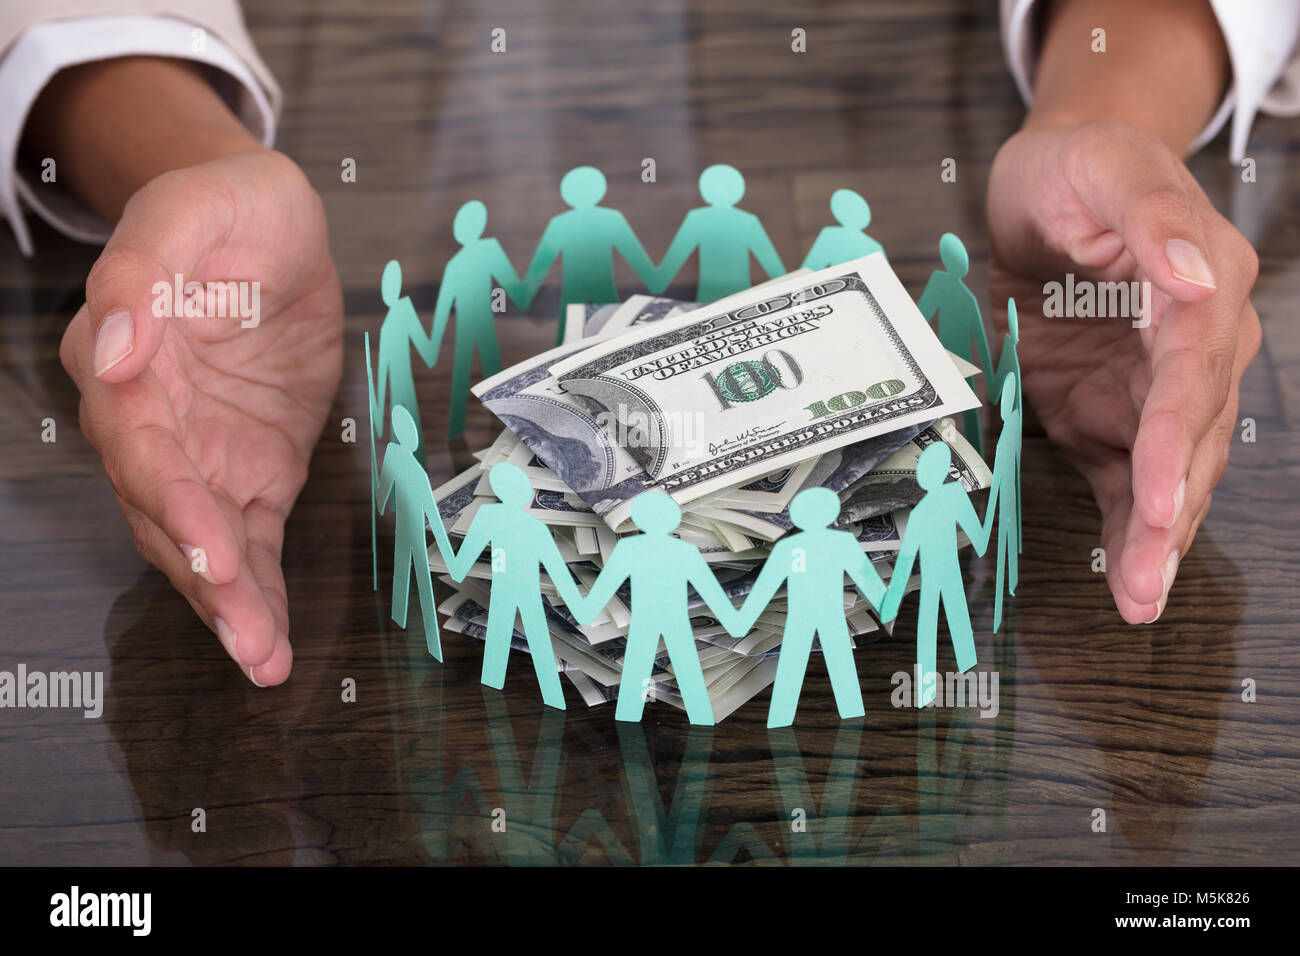 Hand Protecting Paper Cut Out Human Figures Around Stack Of Hundred Dollar Bills Stock Photo